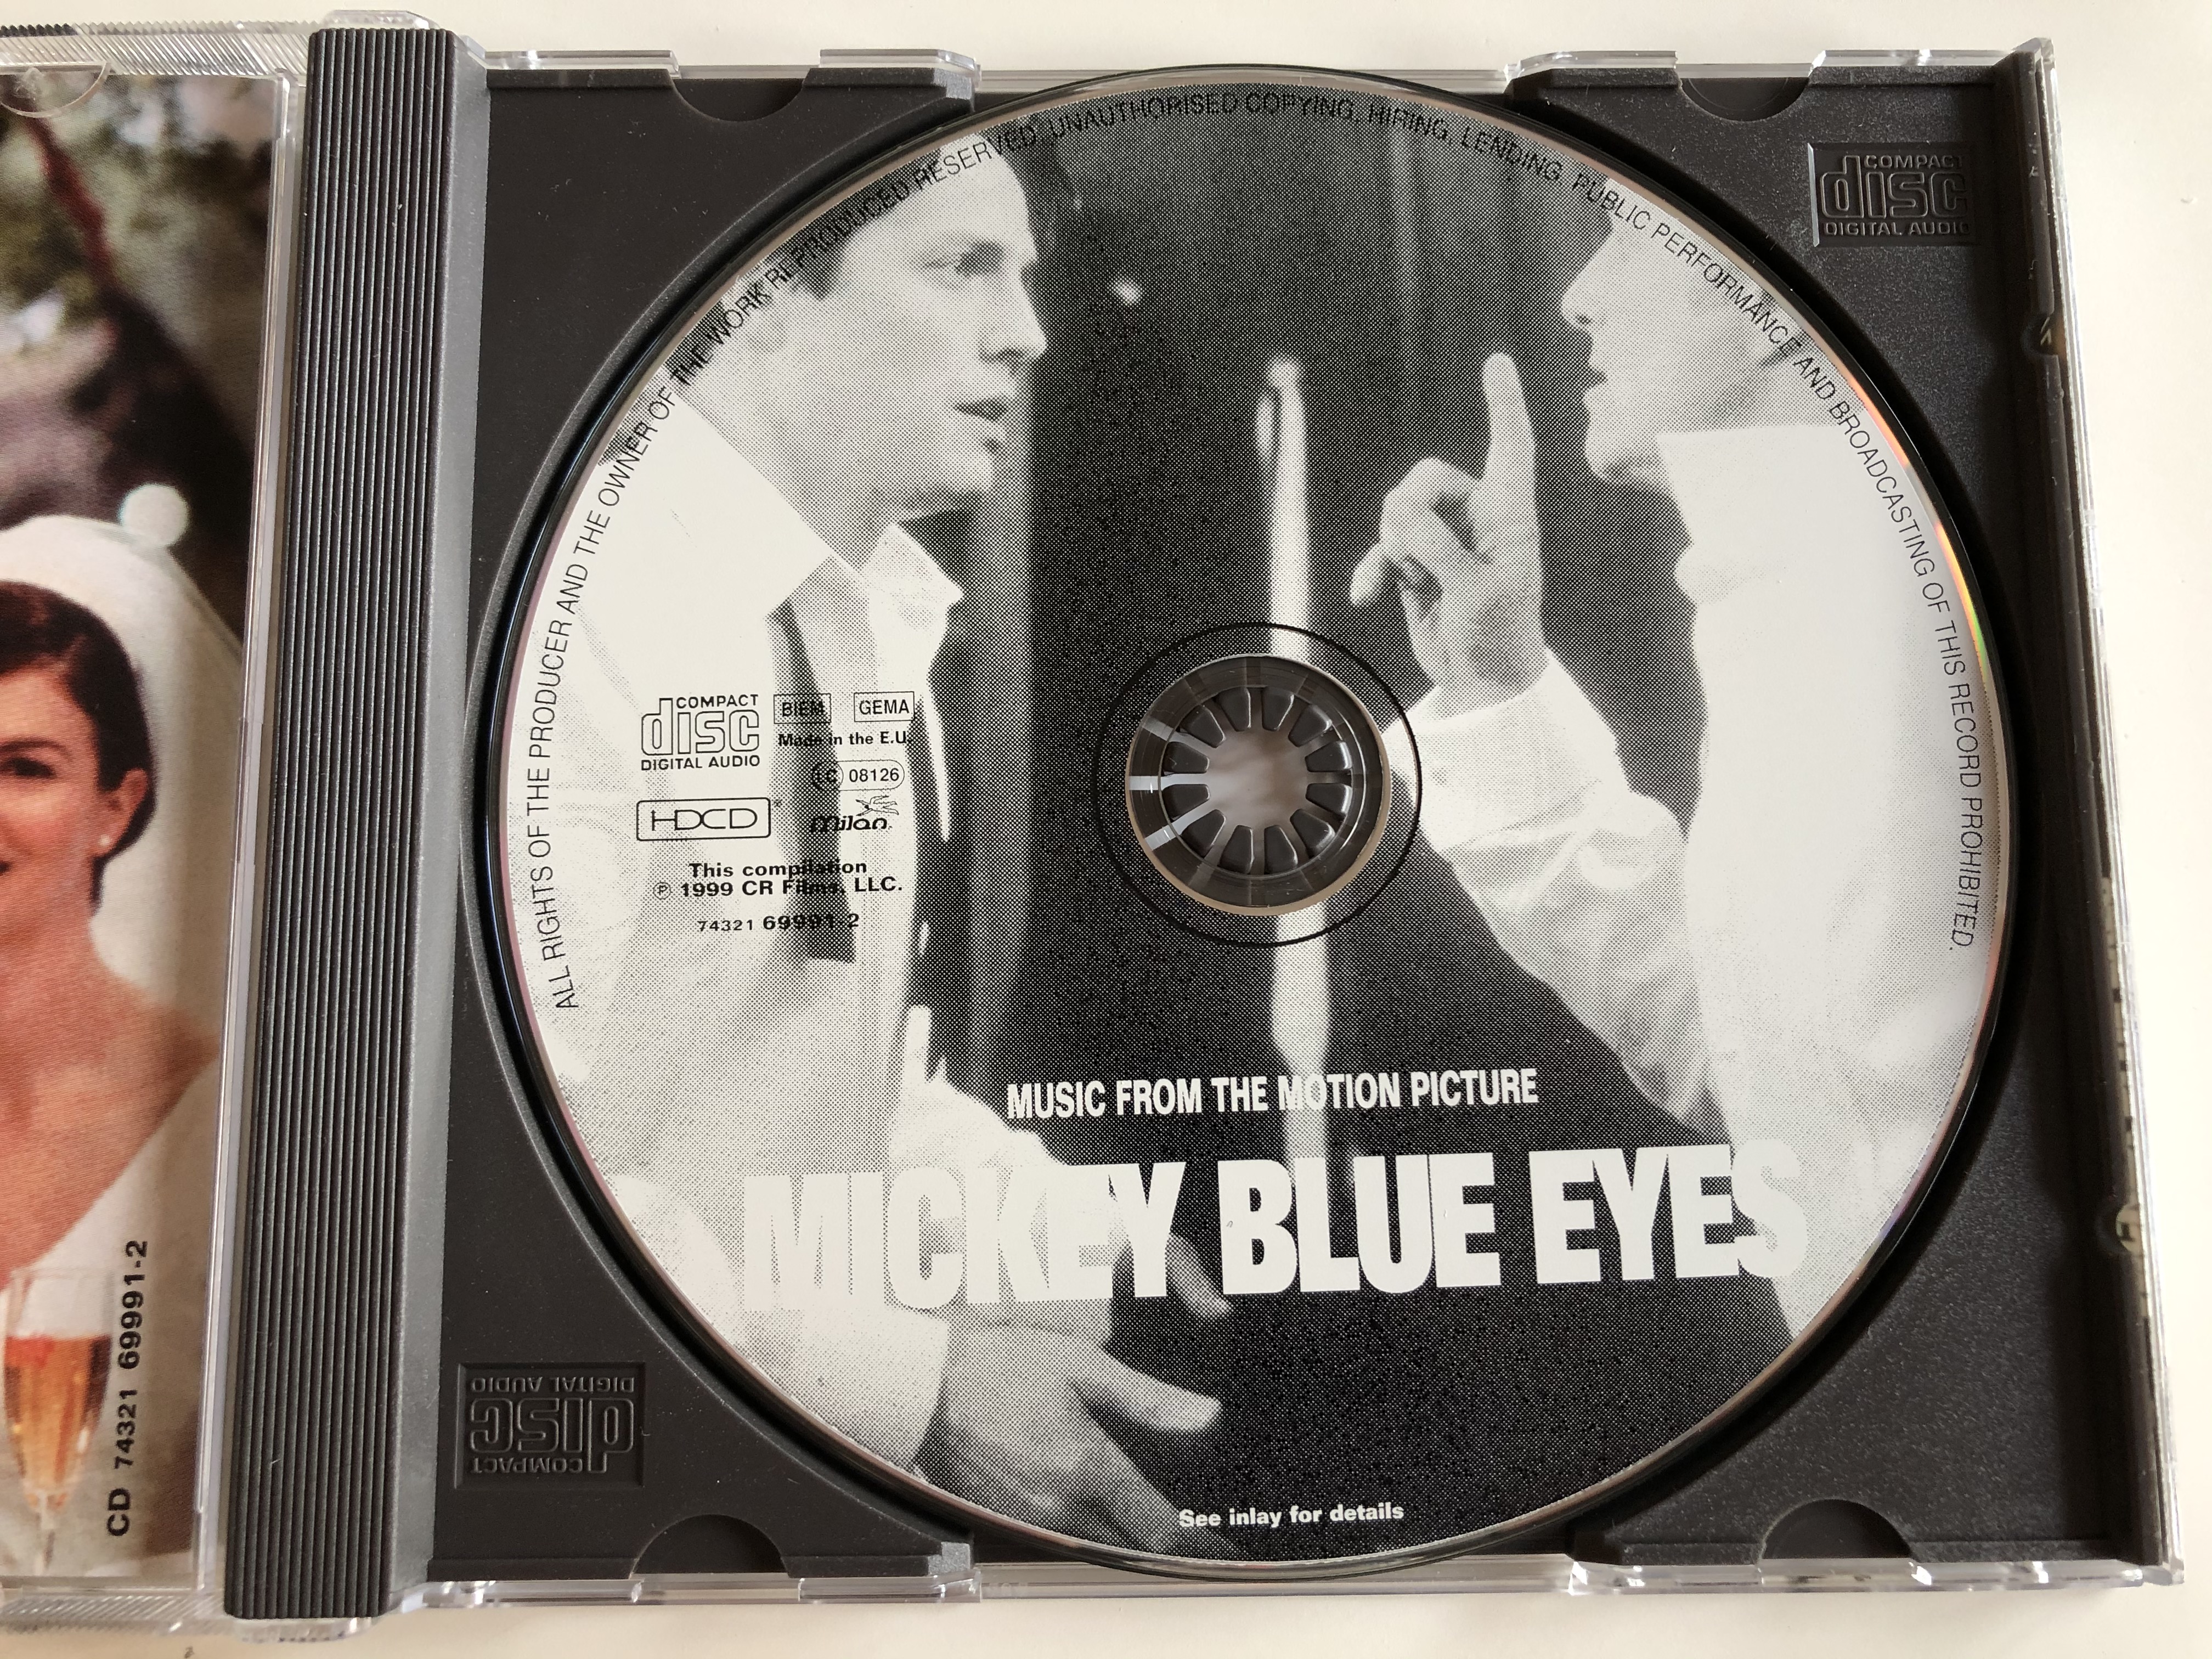 music-from-the-motion-picture-mickey-blue-eyes-milan-audio-cd-1999-74321-69991-2-5-5-.jpg